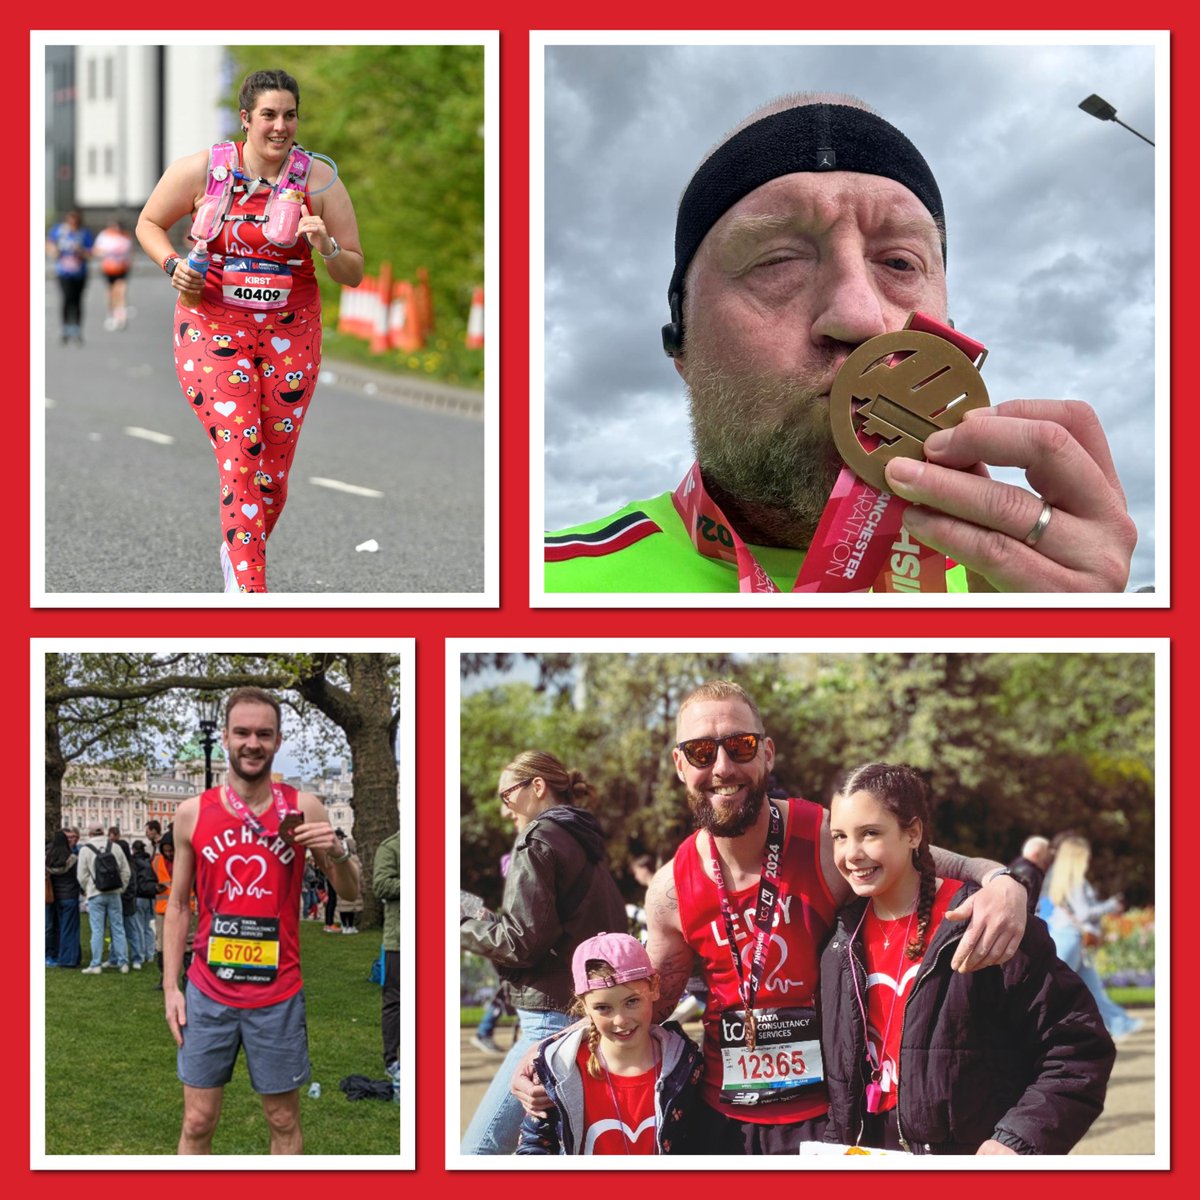 A huge well done to our amazing colleagues who recently took on the Manchester and London Marathons. A special shout out to our @TheBHF runners who conquered the miles and have raised over £5000 for our partnership so far! Well done, Richard, Thomas, Kirsty, Martin, and Milan.